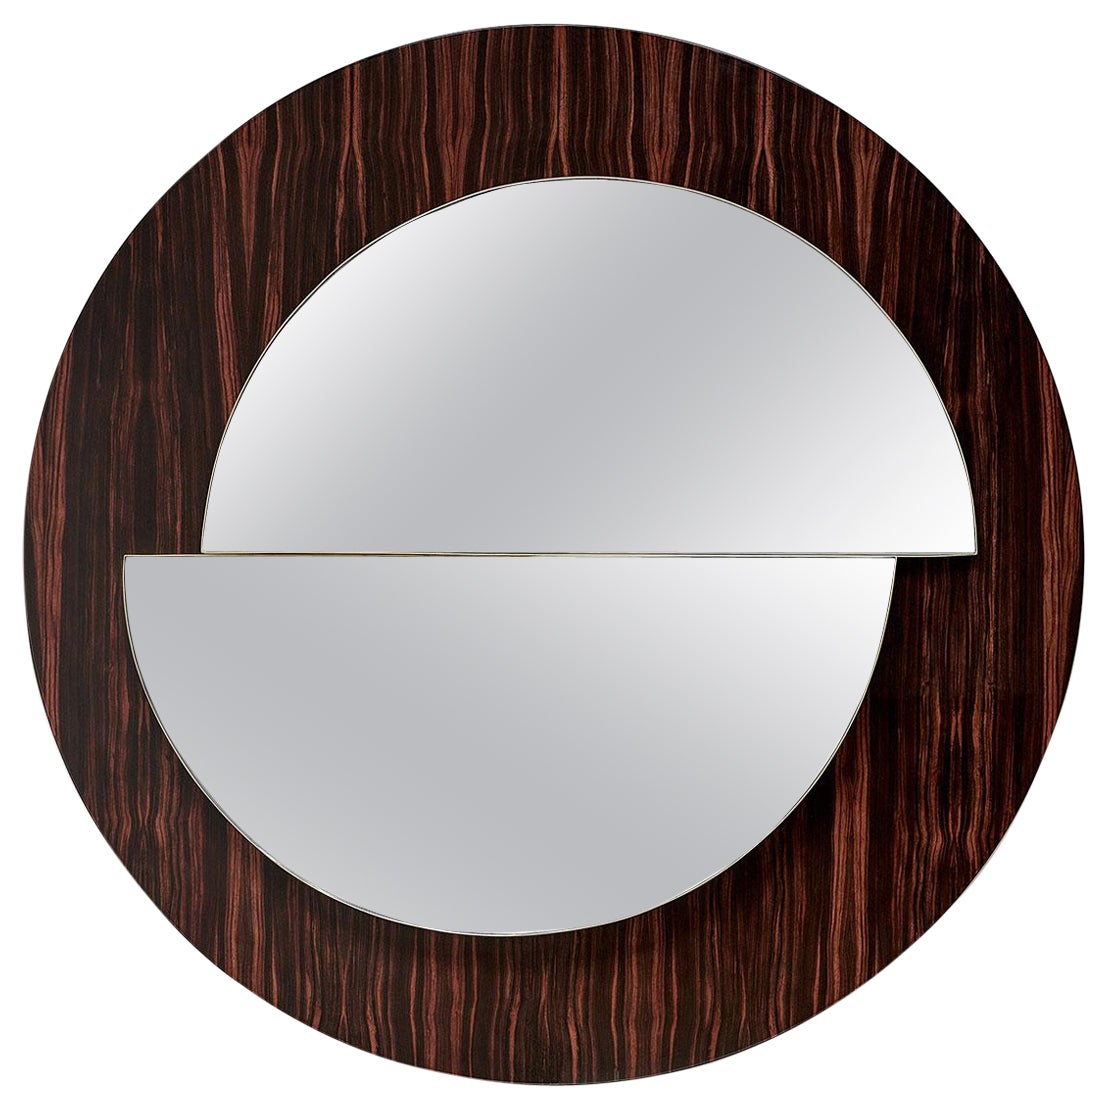  39" DIA Wood Frame Wall Mirror With 2 Reflections in 3D Effect For Sale